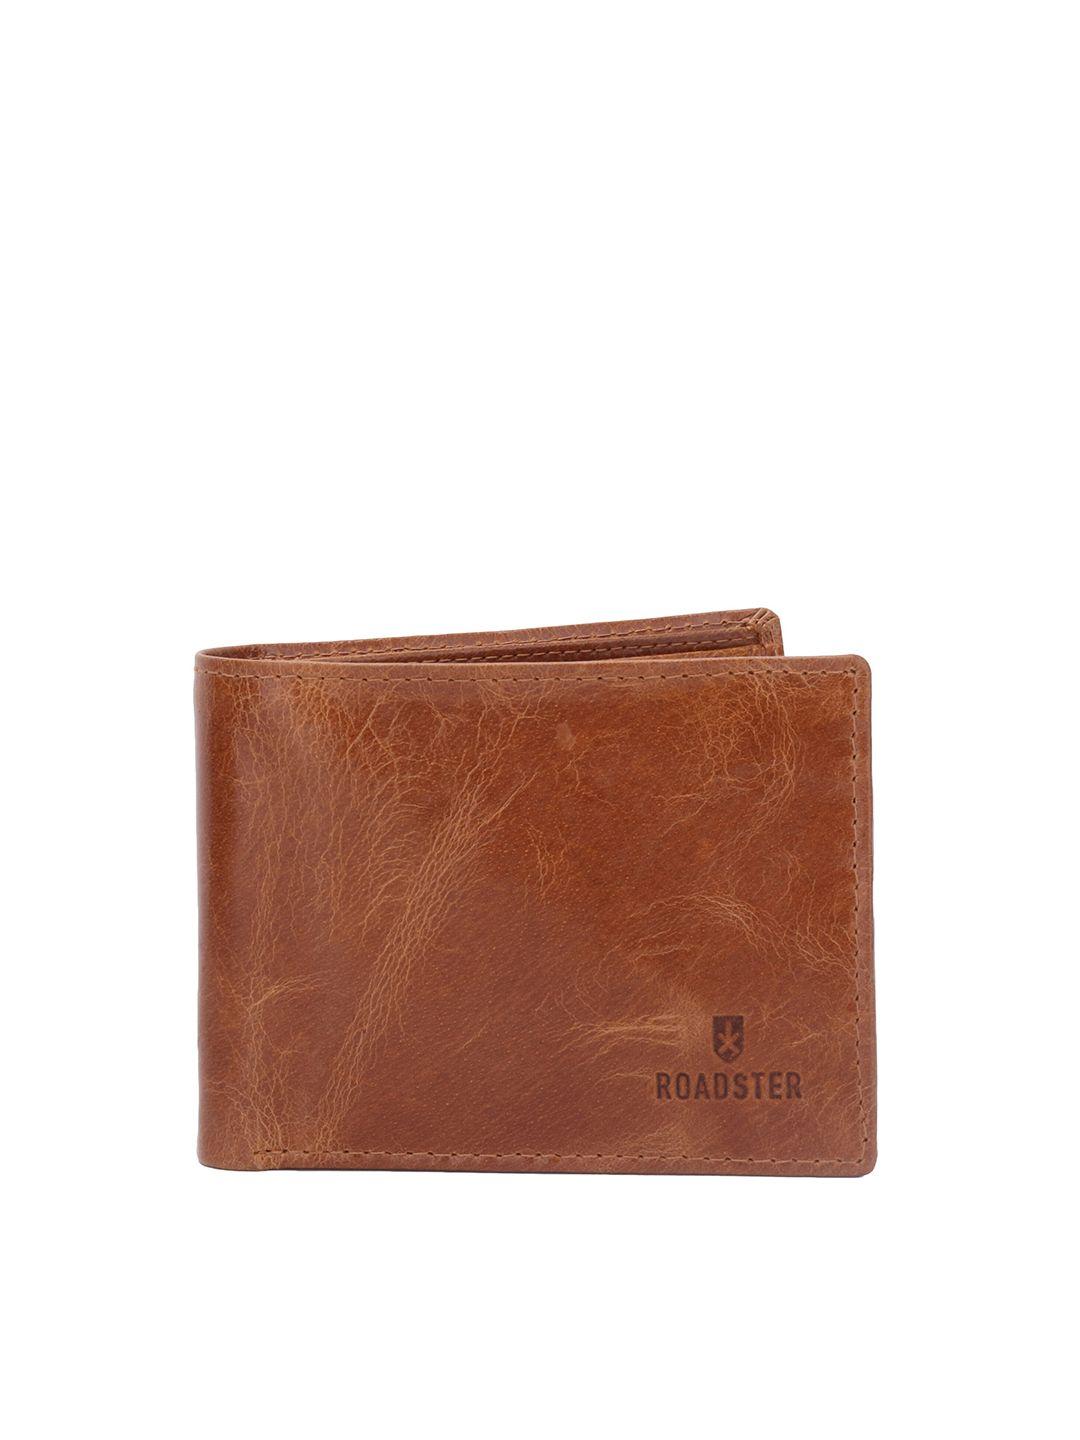 roadster tan men textured leather two fold wallet